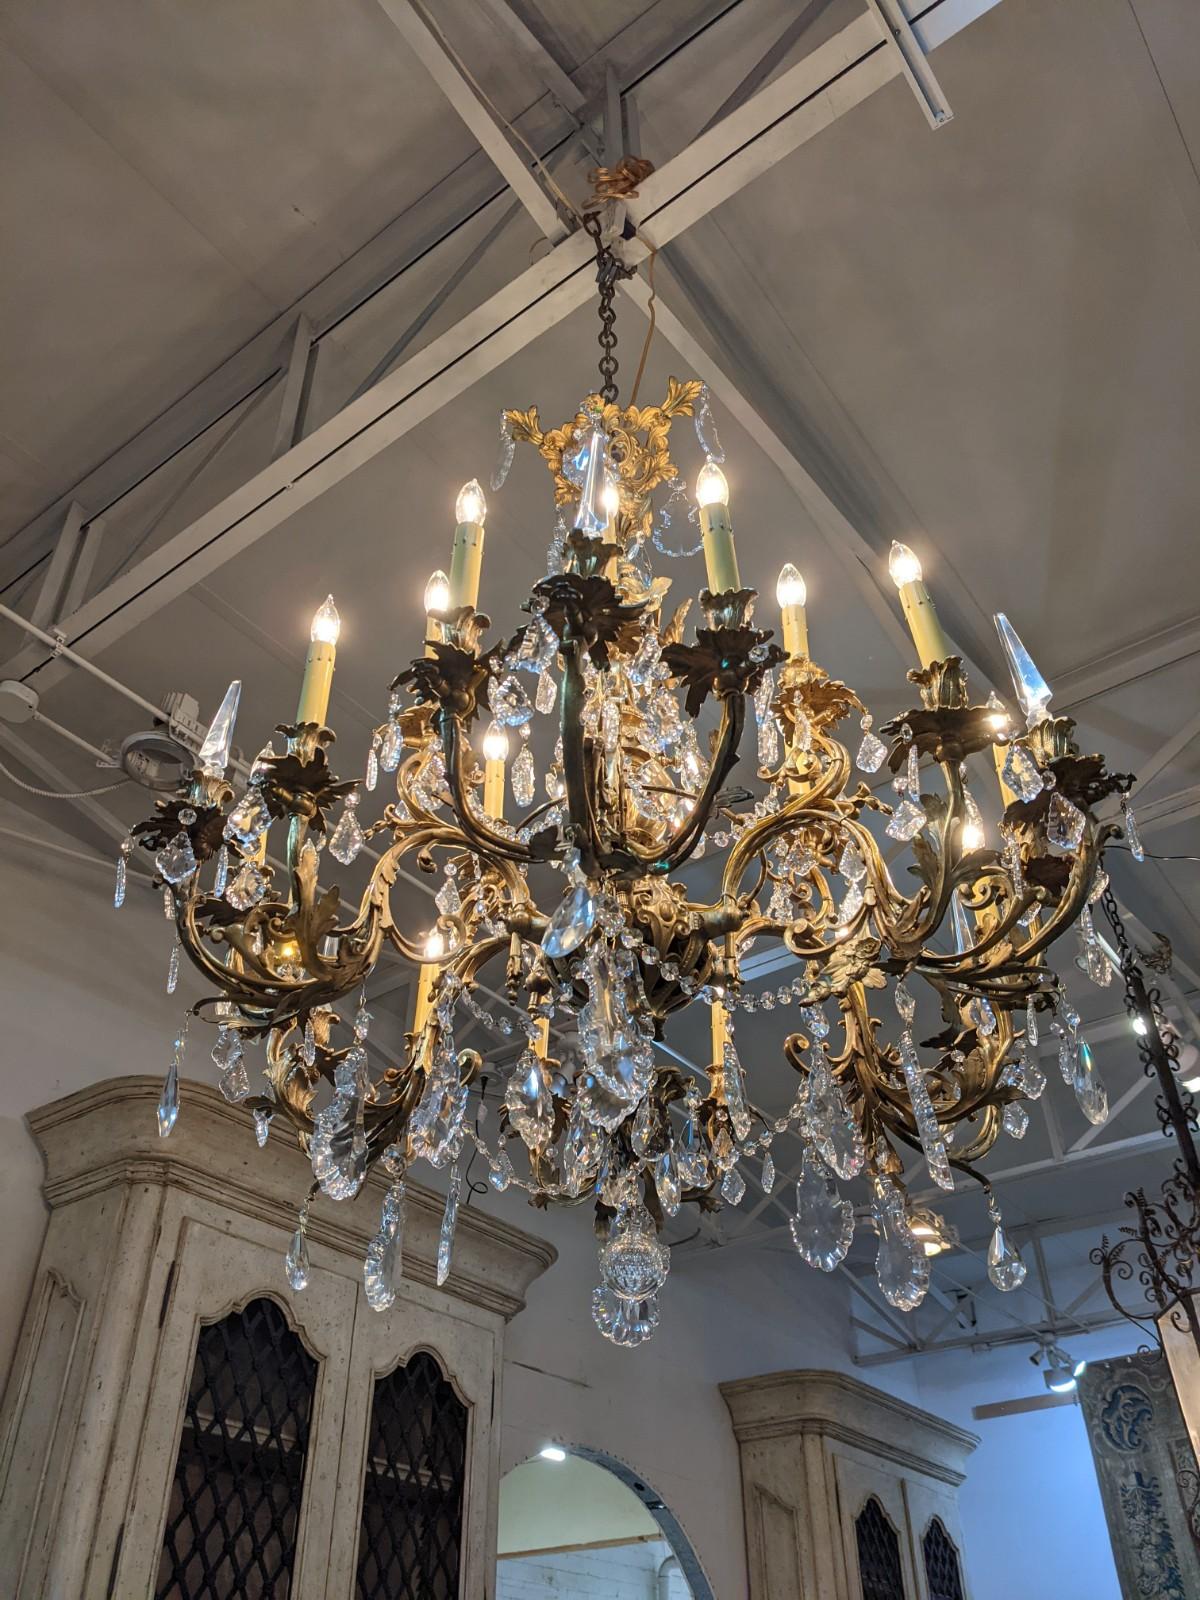 This crystal and bronze chandelier origins from France, circa 1880.

It was originally with gas but it has been transformed with electricity.

The Chandelier has 18 lights (12 the first level and 6 the second level).